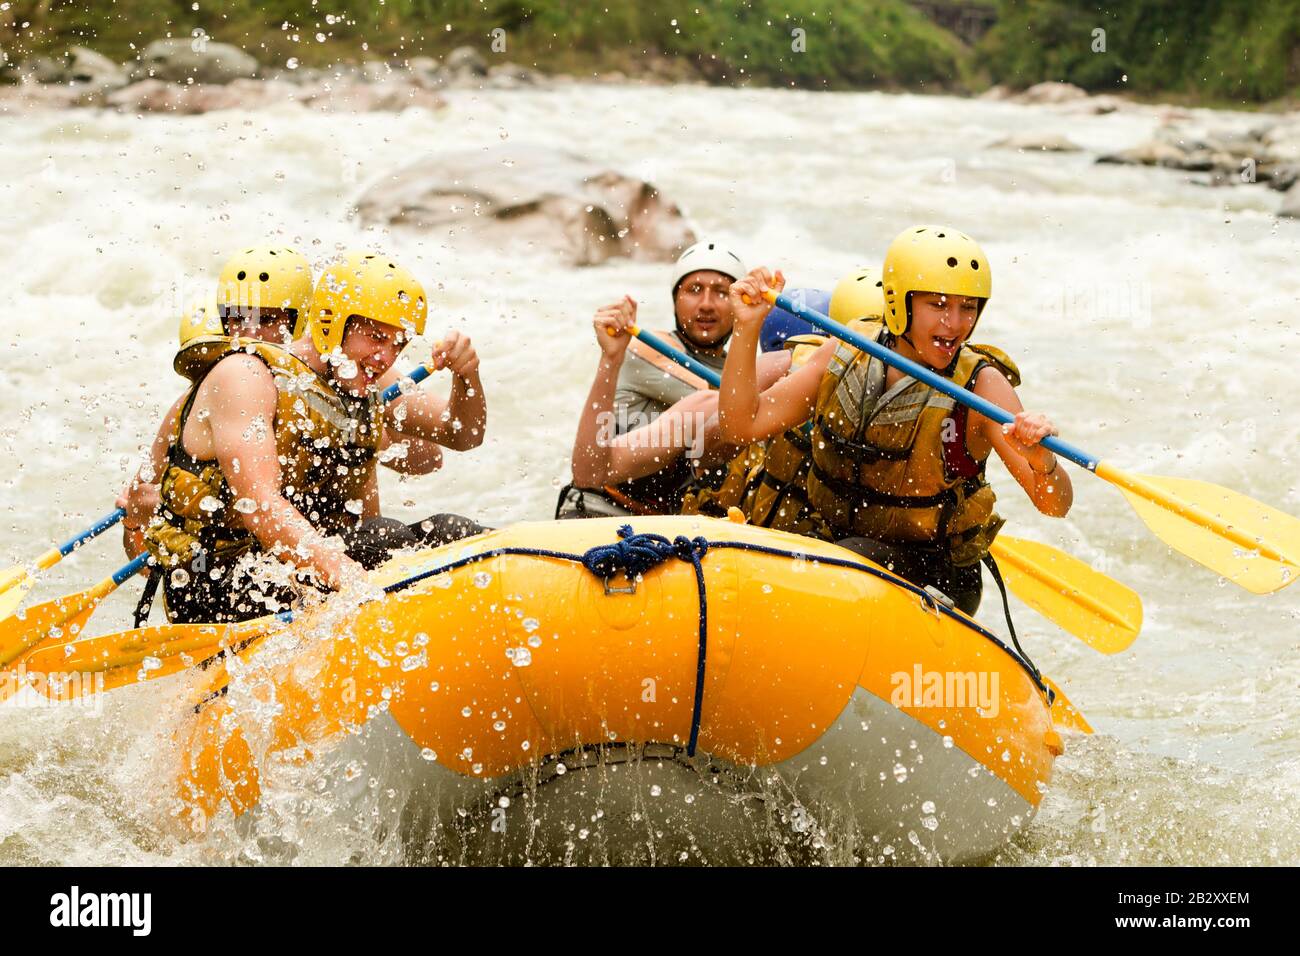 Crowd Of Mixed Mountaineer Men And Women With Guided By Professional Pilot On Whitewater Waterway Rafting In Ecuador Stock Photo